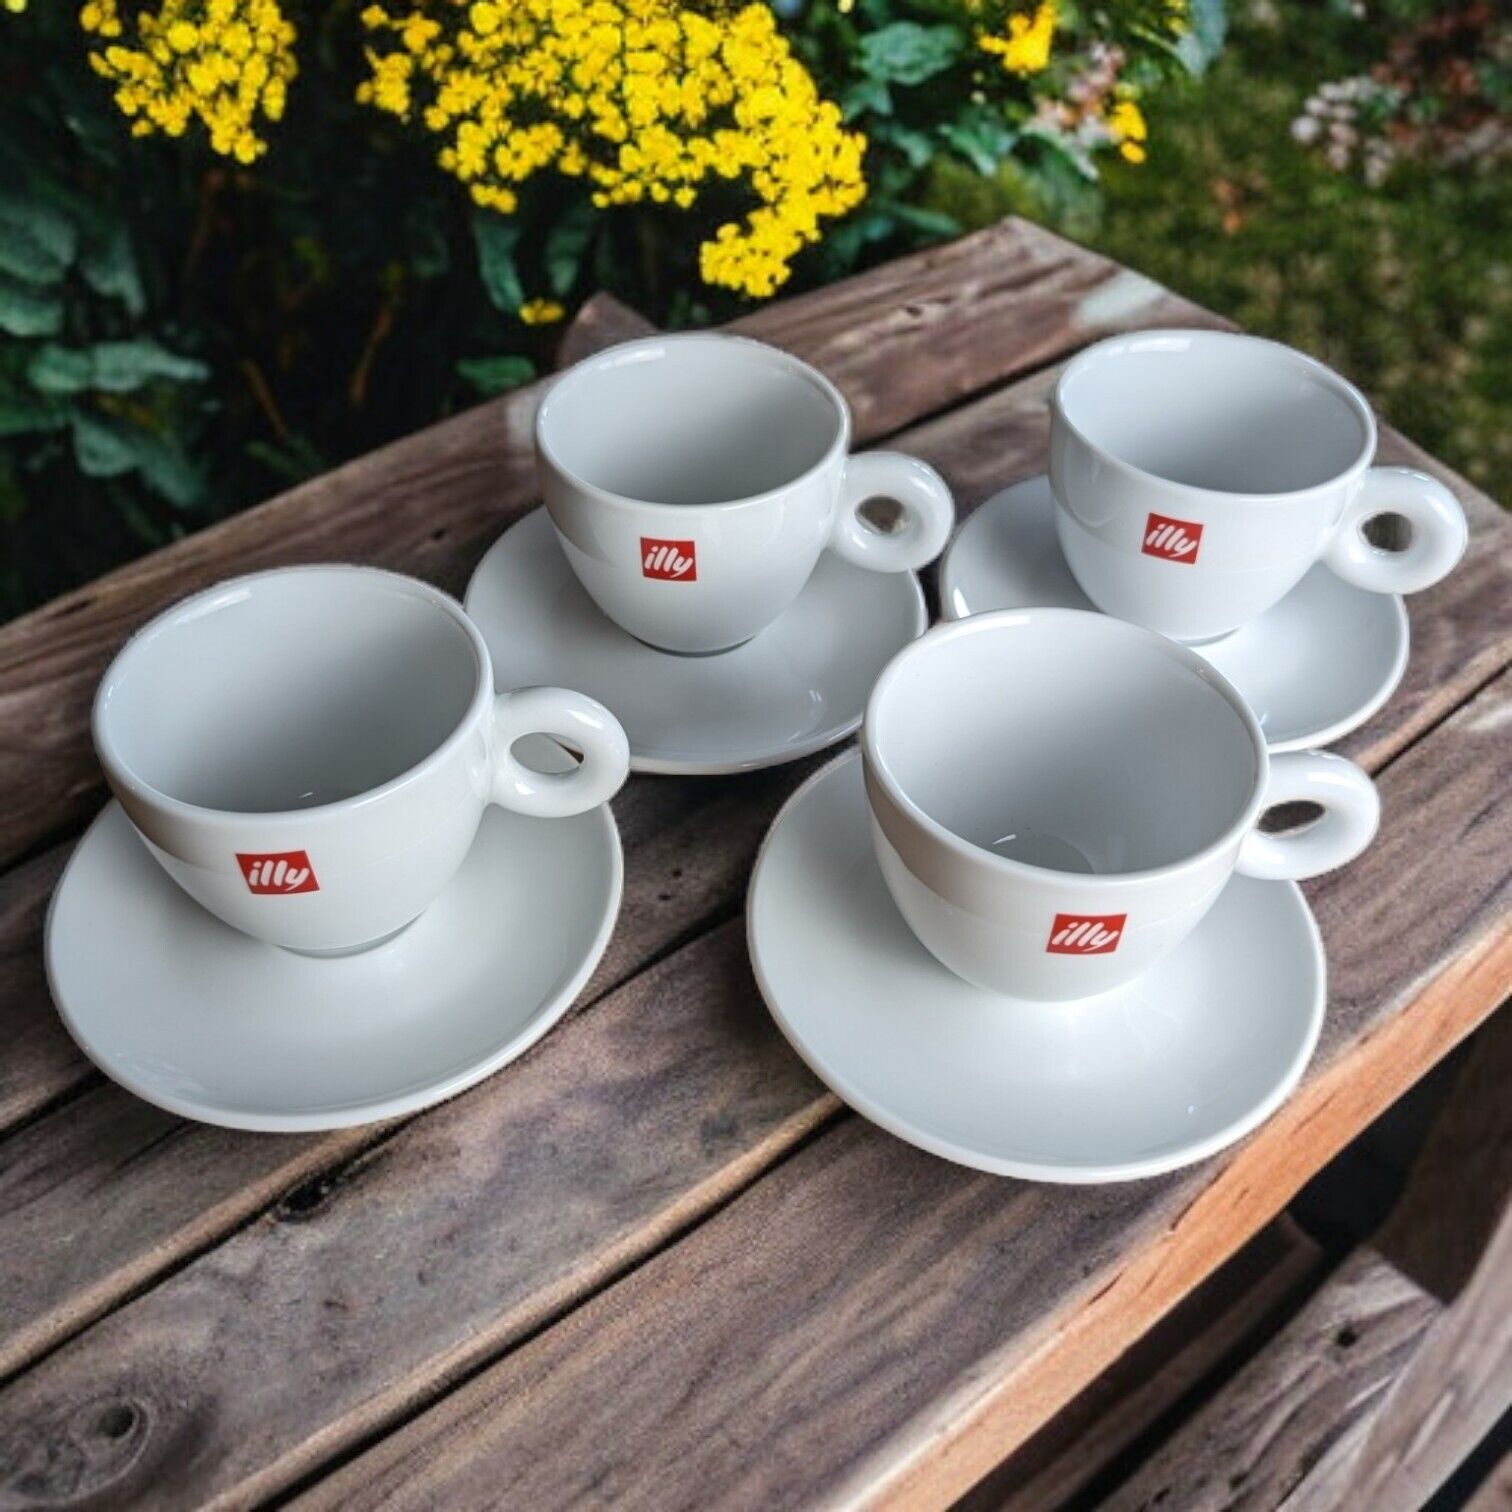 4 ILLY White Red Logo Espresso Cups & Saucers, O Handle, Portugal, 8 Pcs